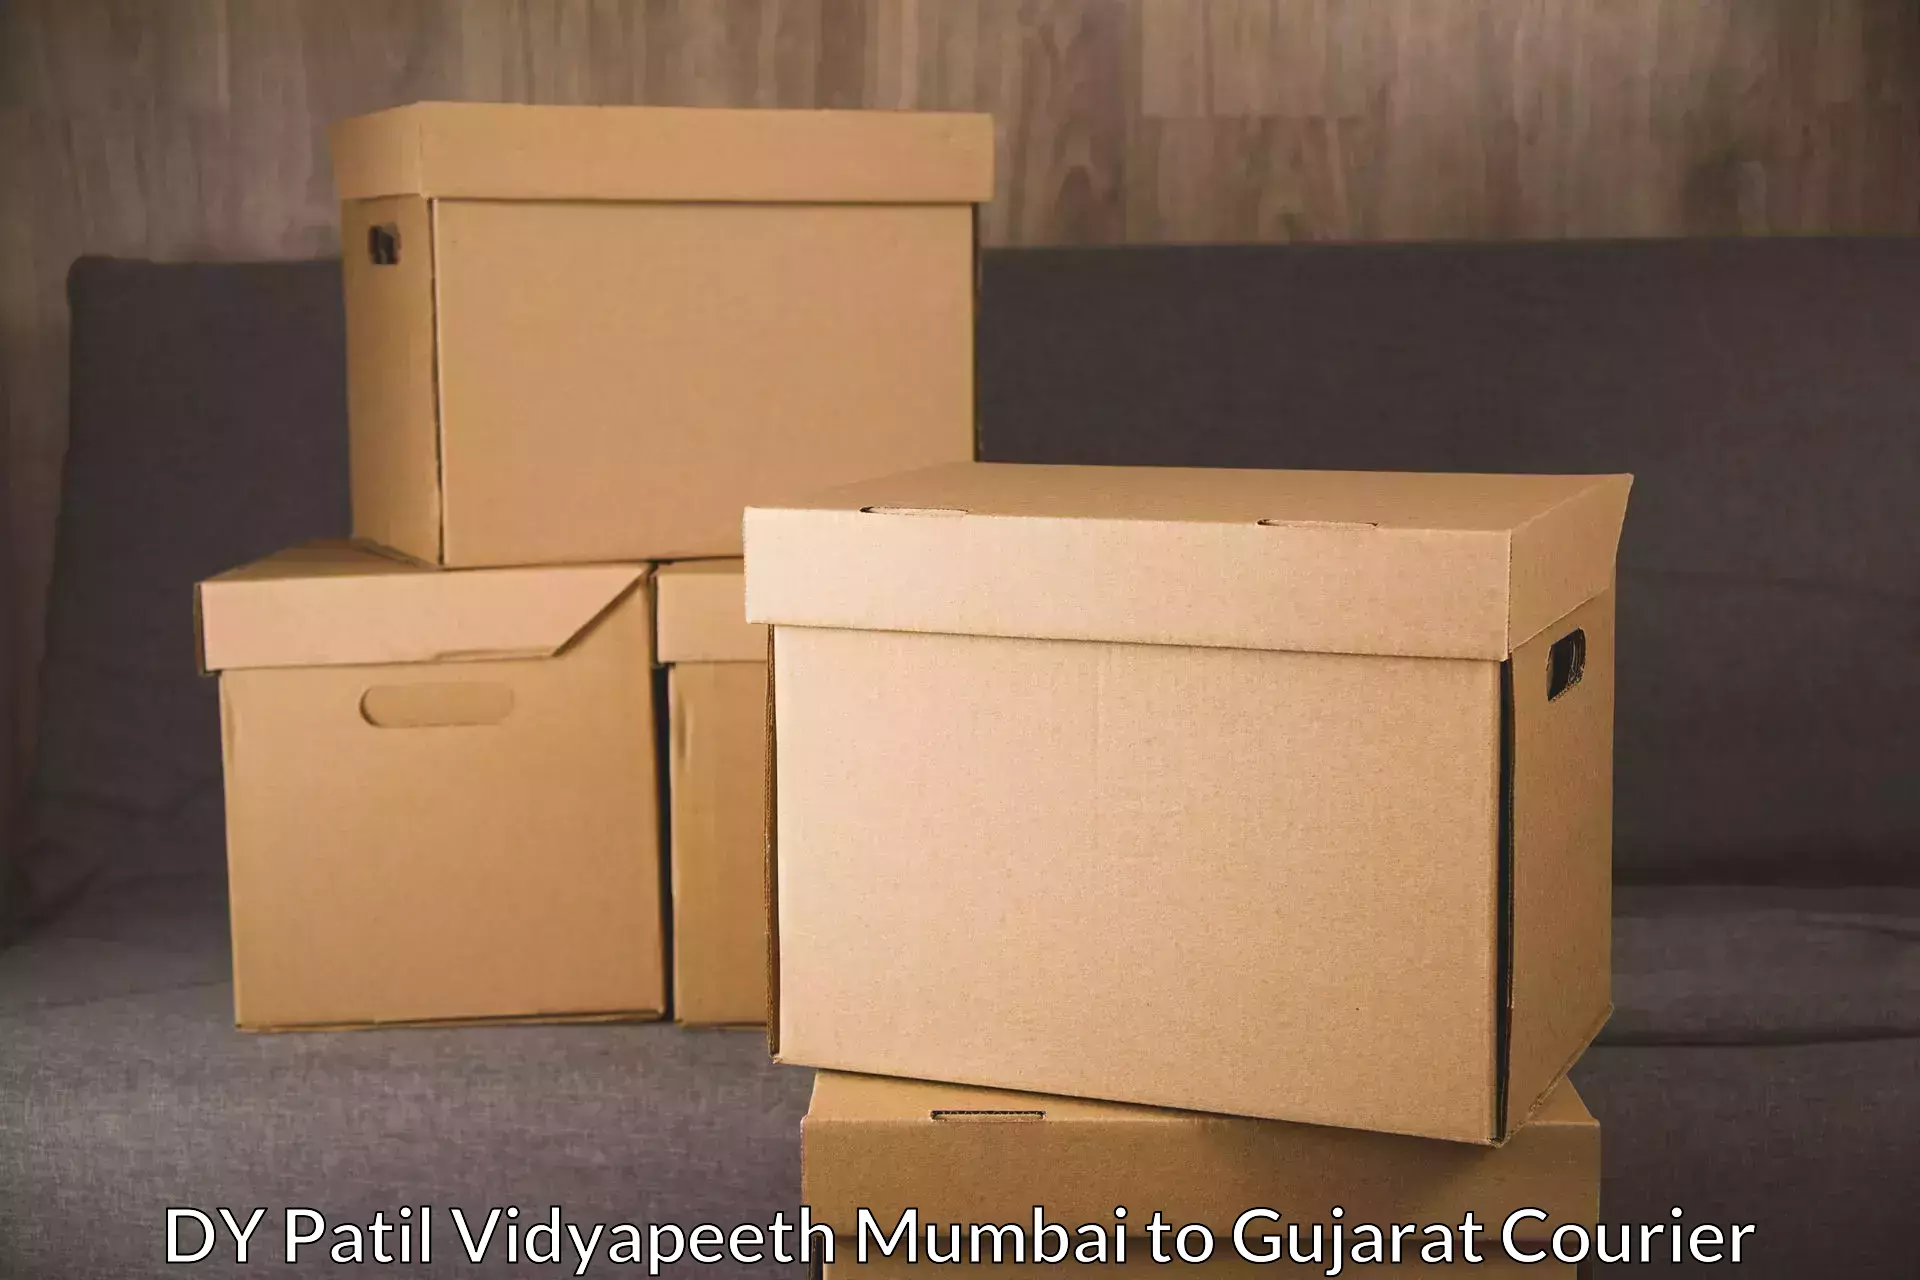 Corporate courier solutions DY Patil Vidyapeeth Mumbai to Ankleshwar